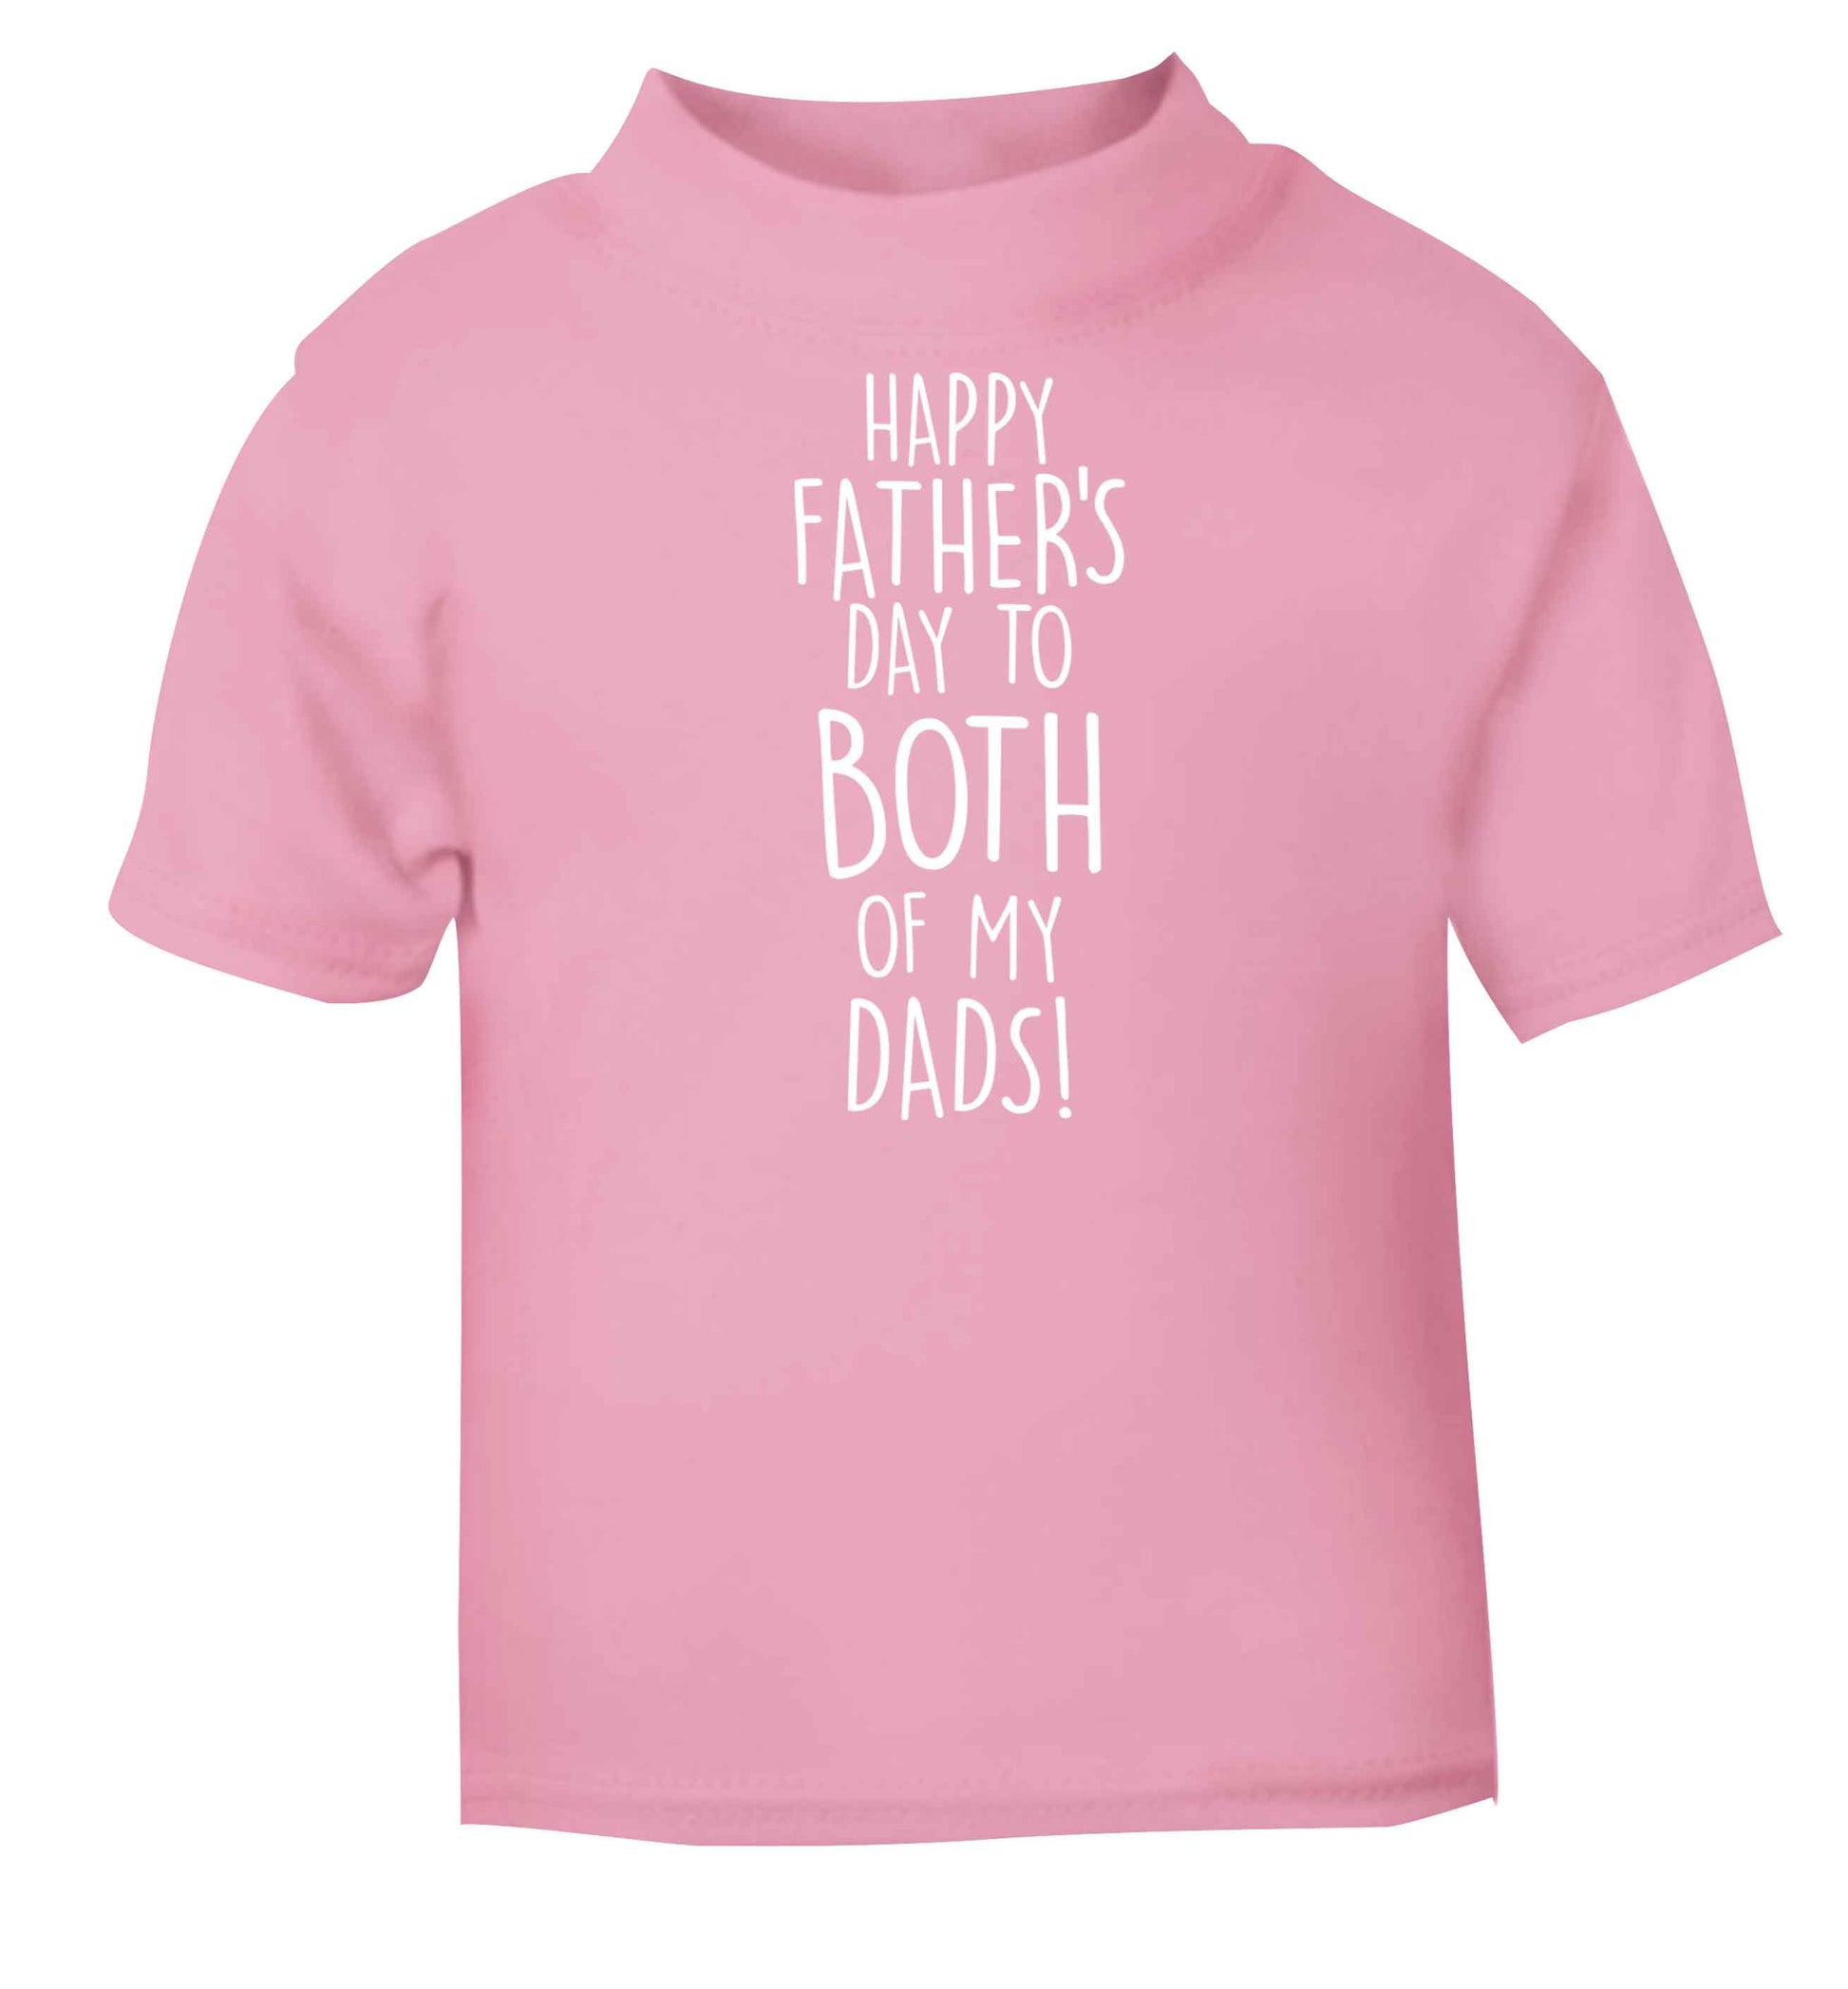 Happy Father's day to both of my dads light pink baby toddler Tshirt 2 Years